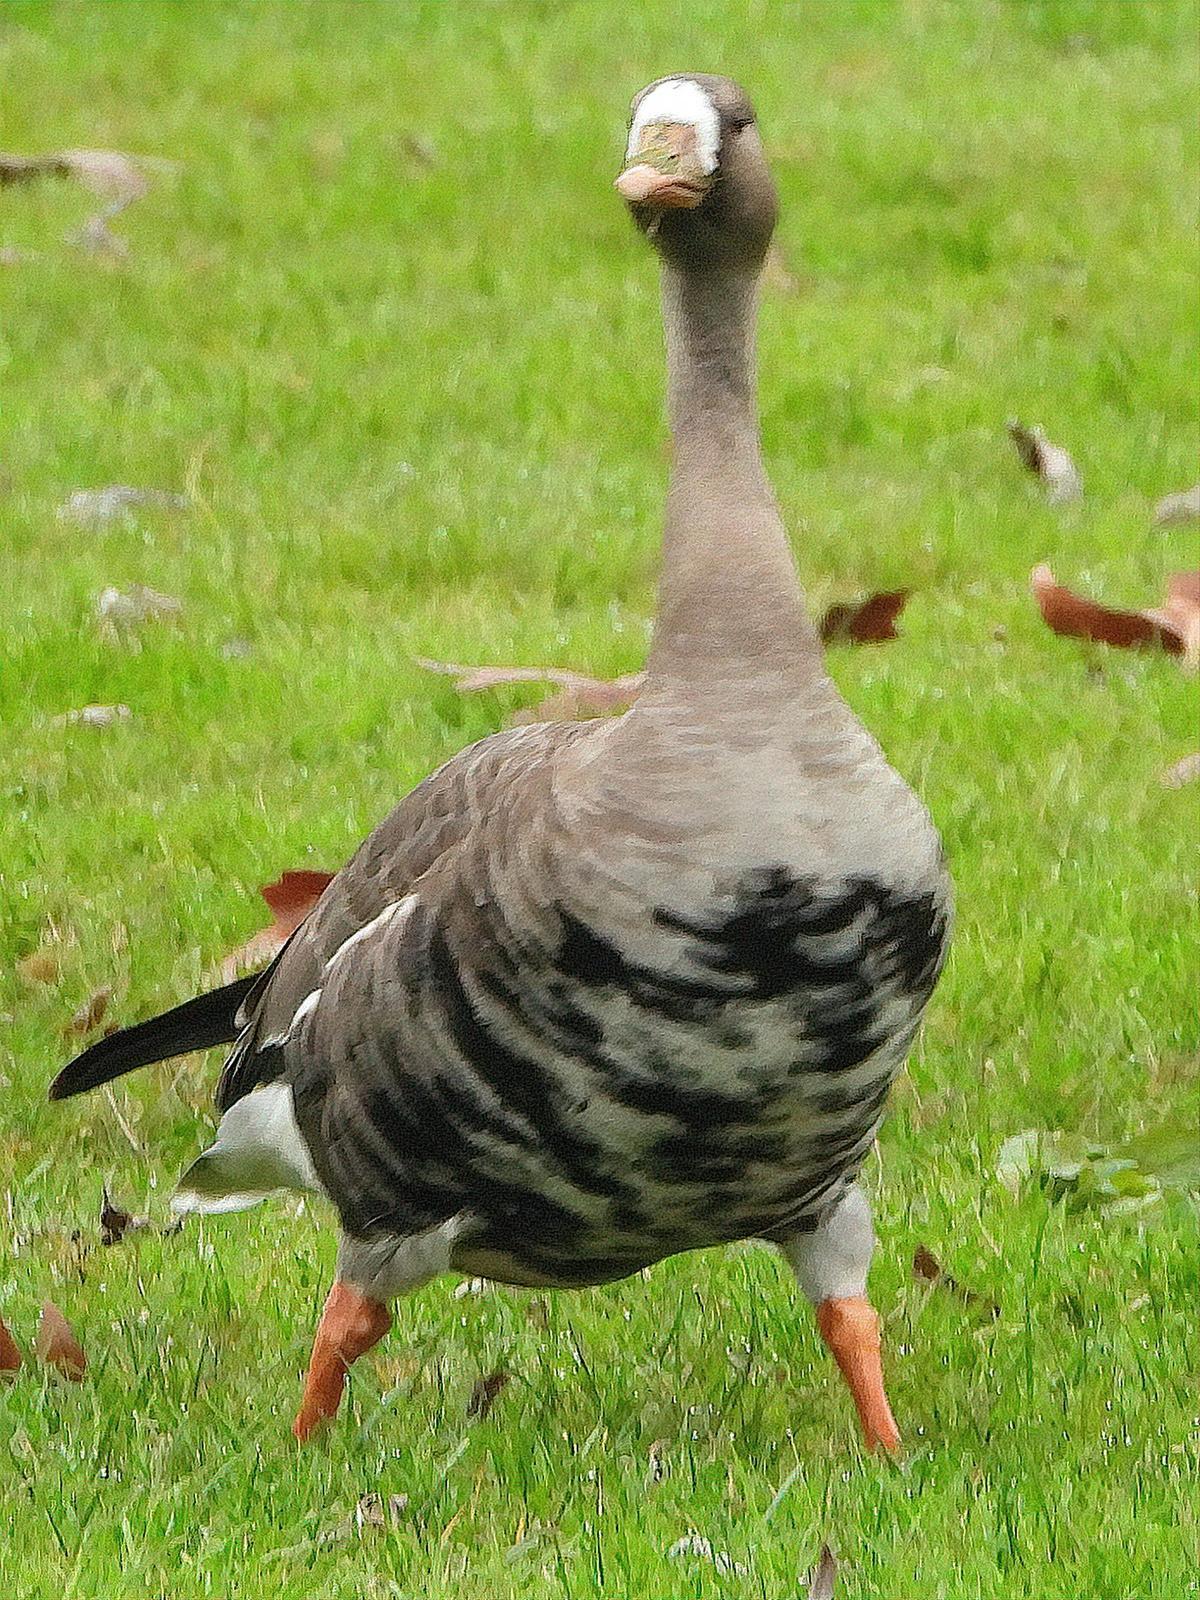 Greater White-fronted Goose Photo by Dan Tallman